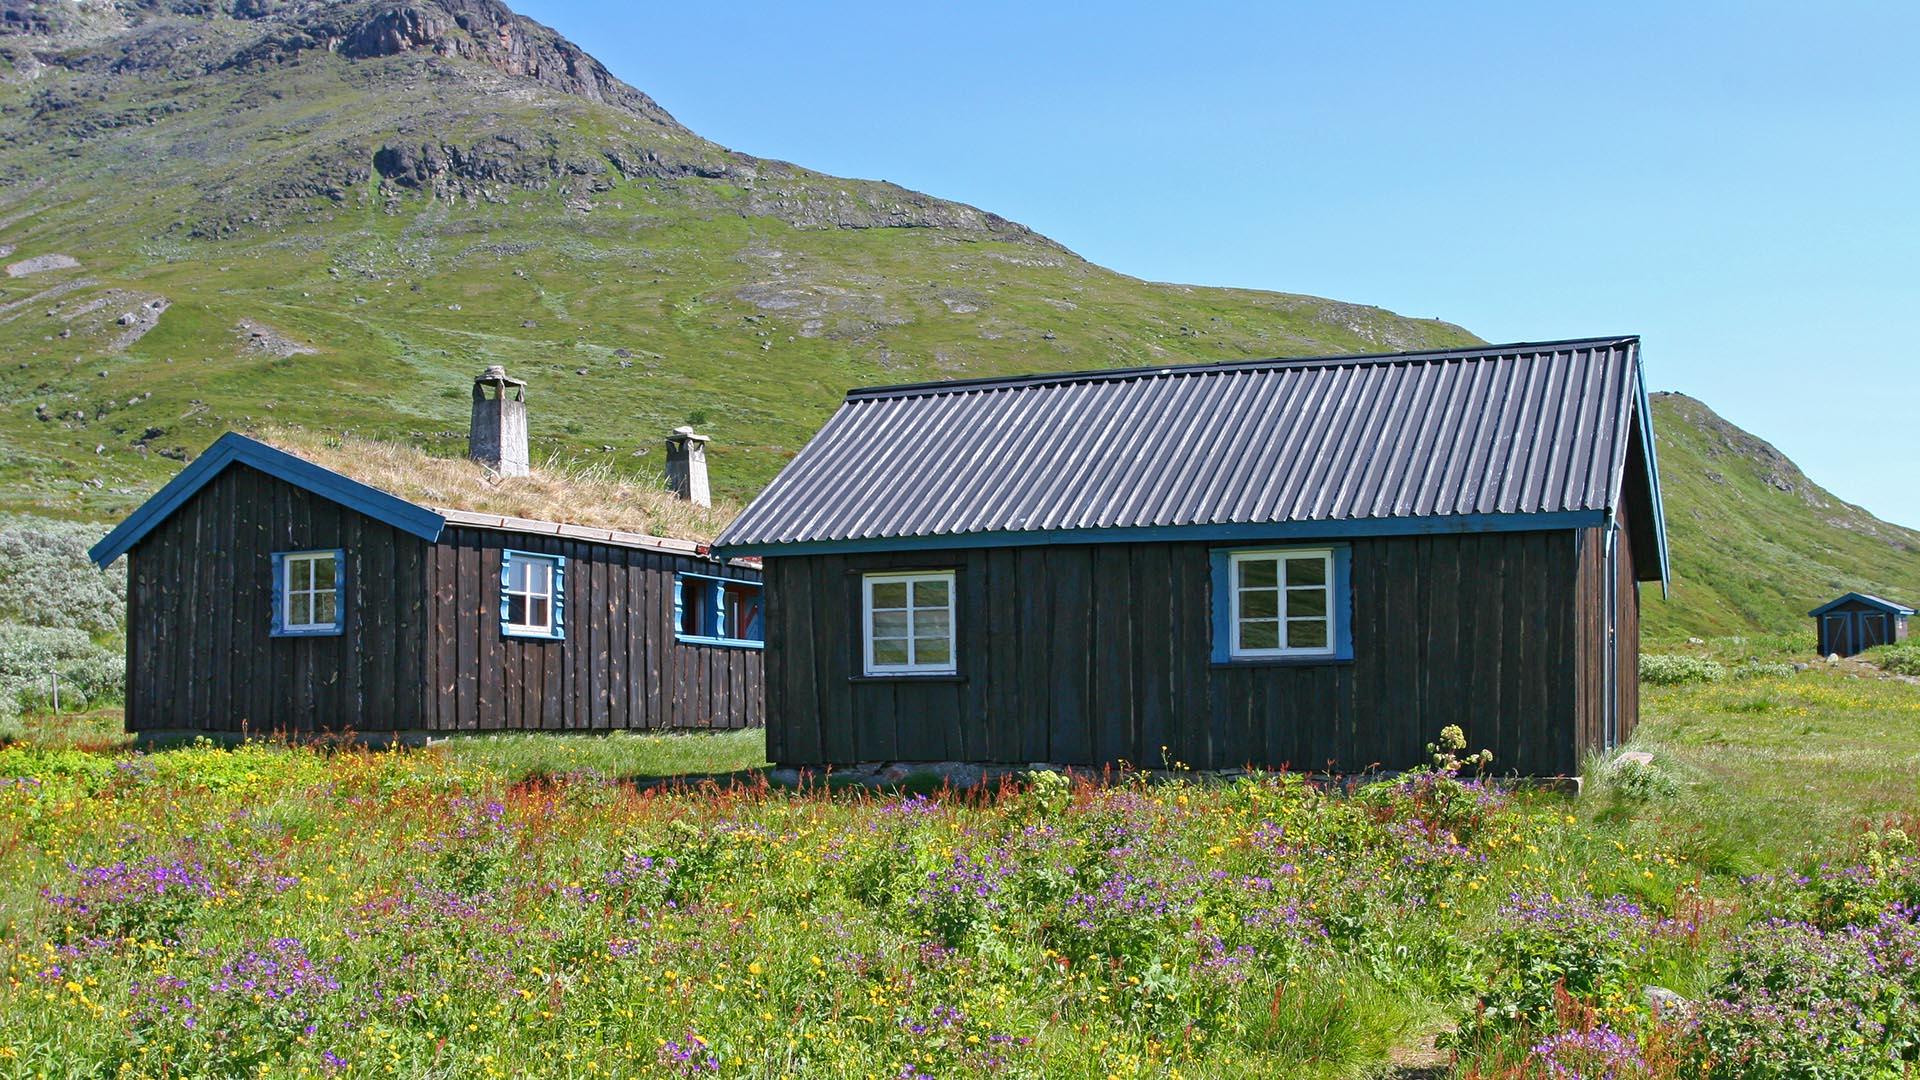 Two brown cabins with blue window frames sit in a summer mountain meadow with purple flowers